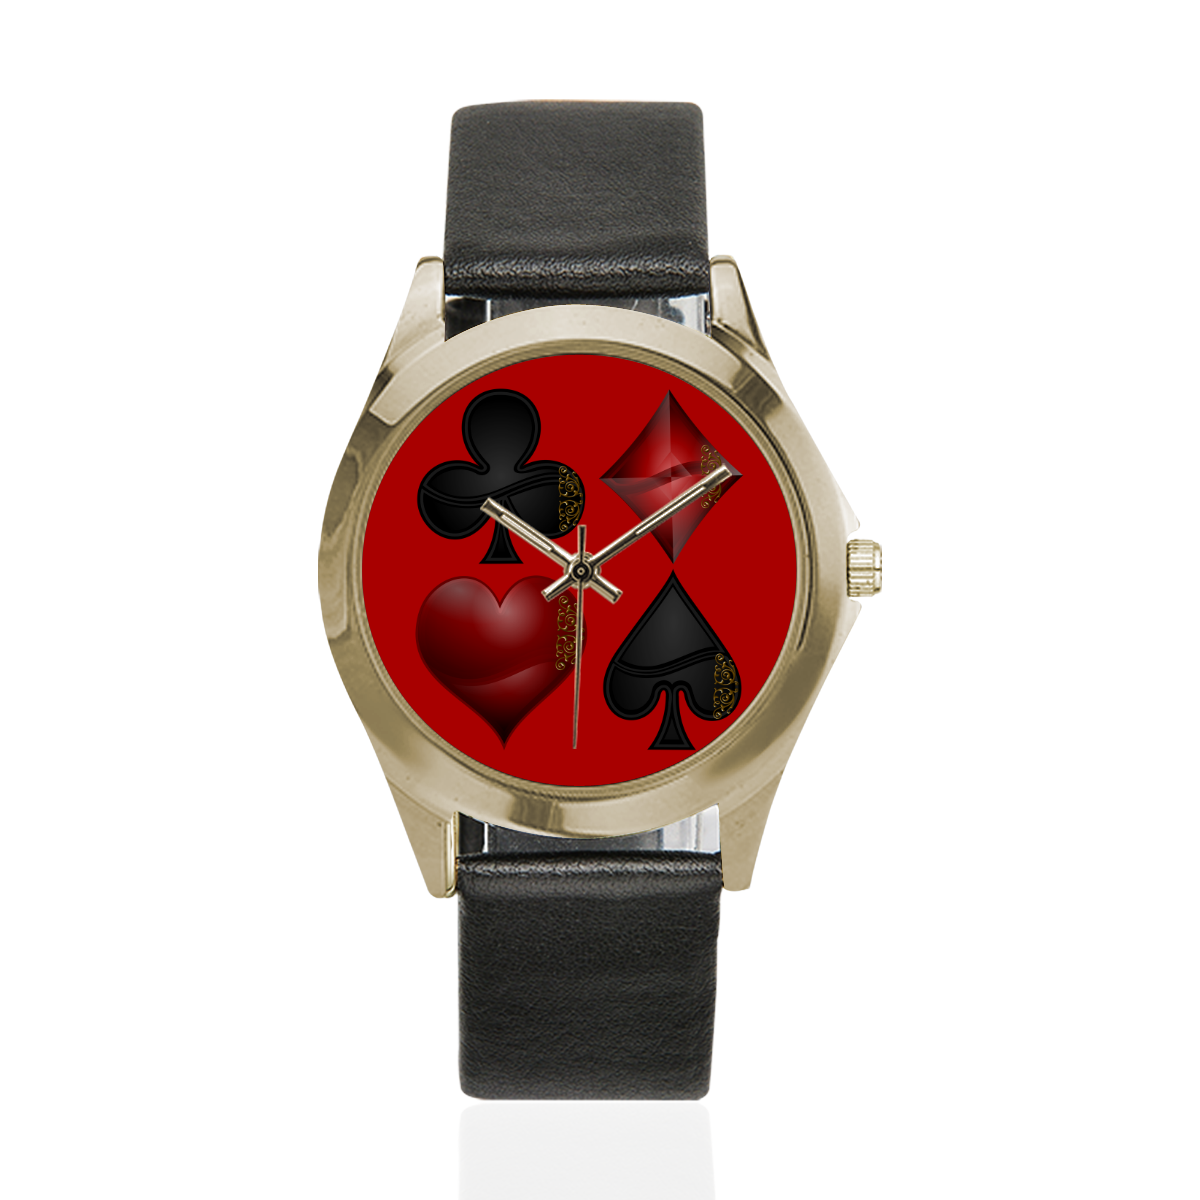 Las Vegas Black and Red Casino Poker Card Shapes (Red) Unisex Silver-Tone Round Leather Watch (Model 216)